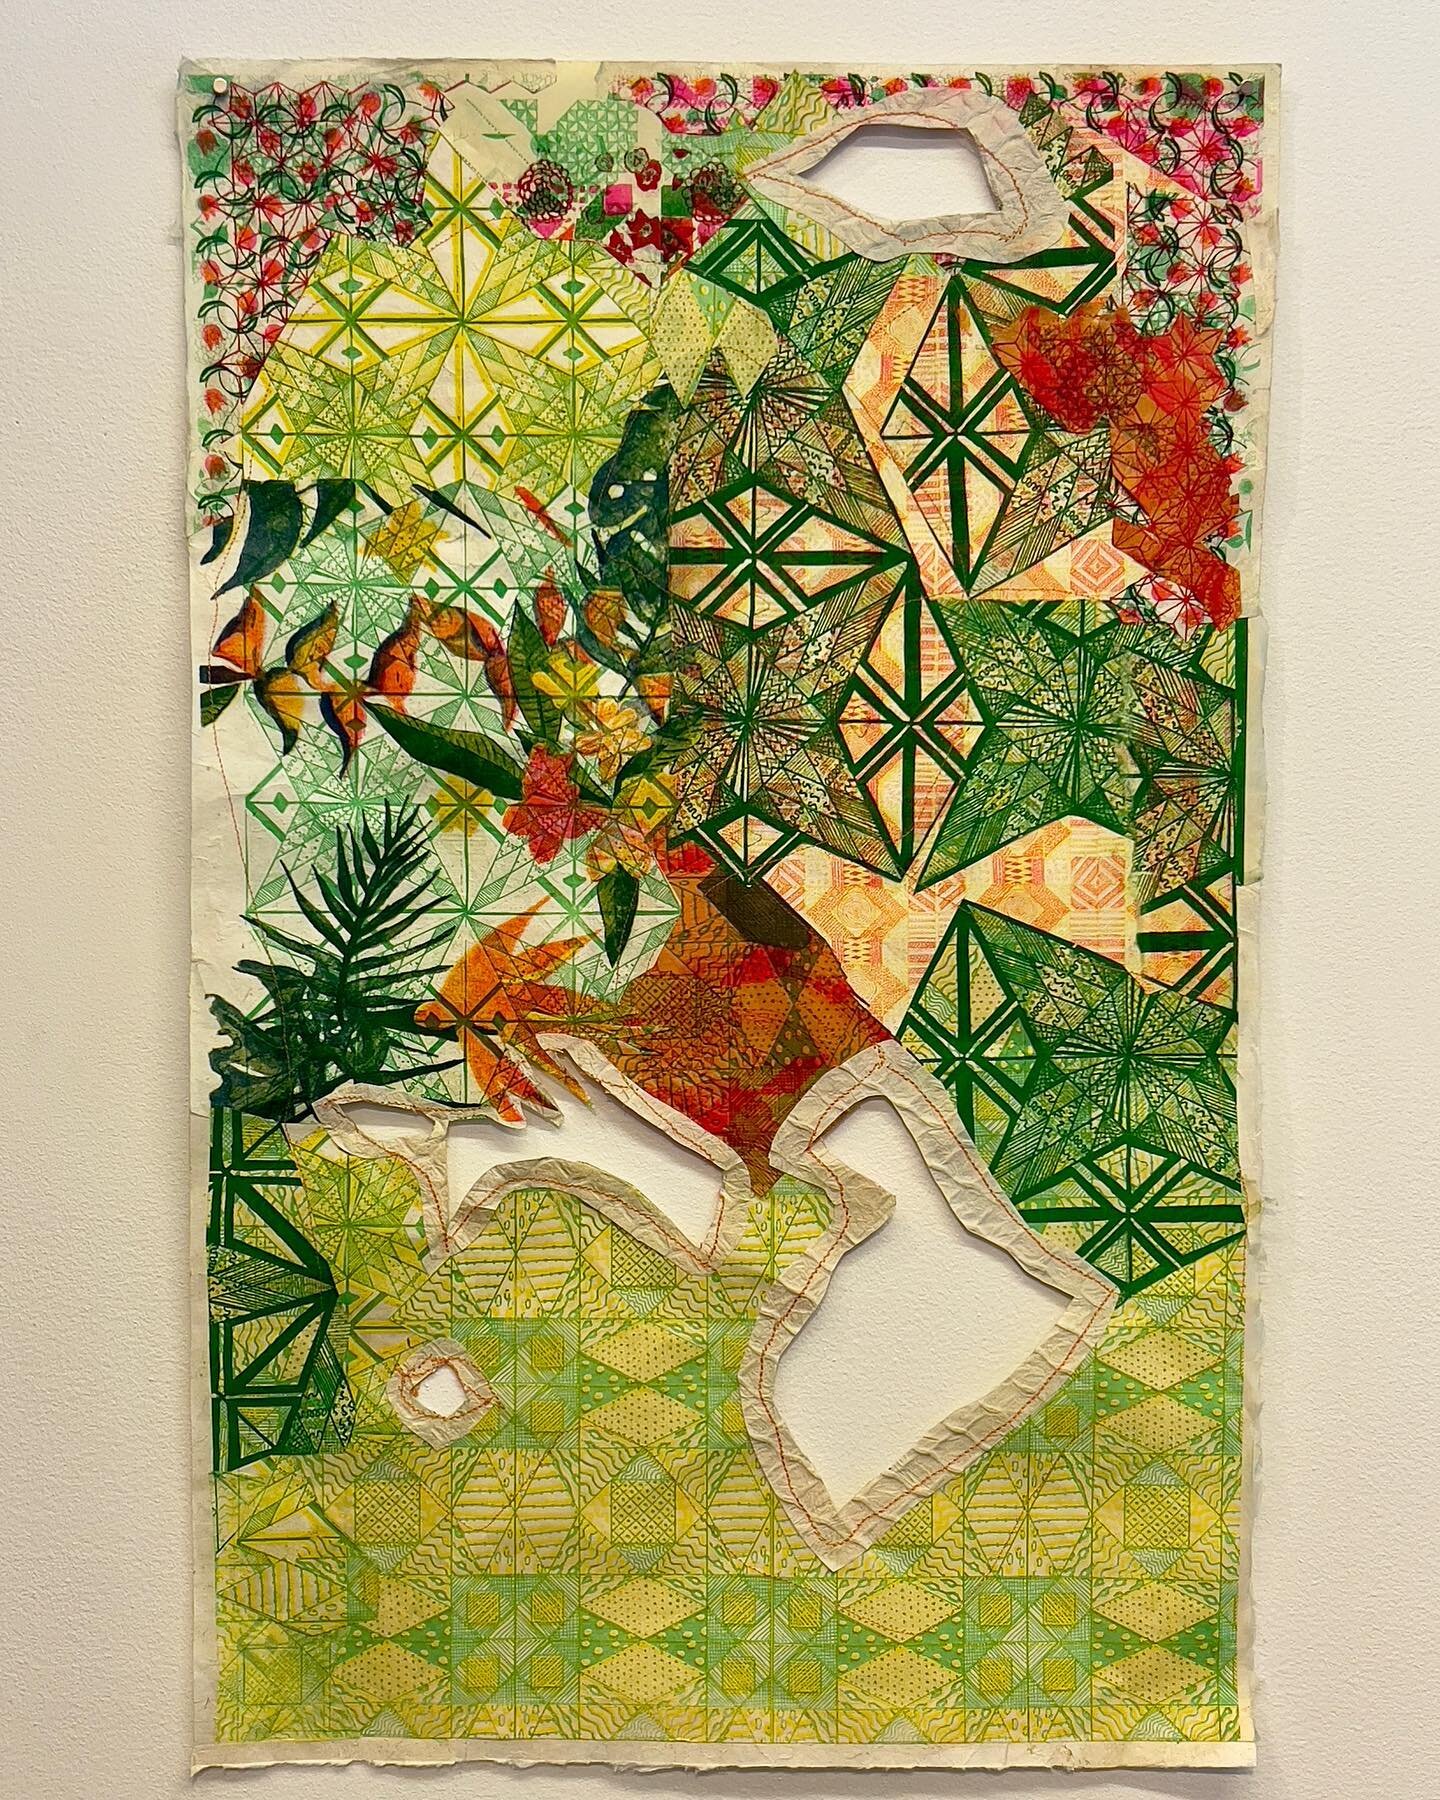 New work. &ldquo;Greenhouse,&rdquo; 28 x 17 1/2 inches; #collage of #risograph prints on handmade and Japanese papers with sewing.